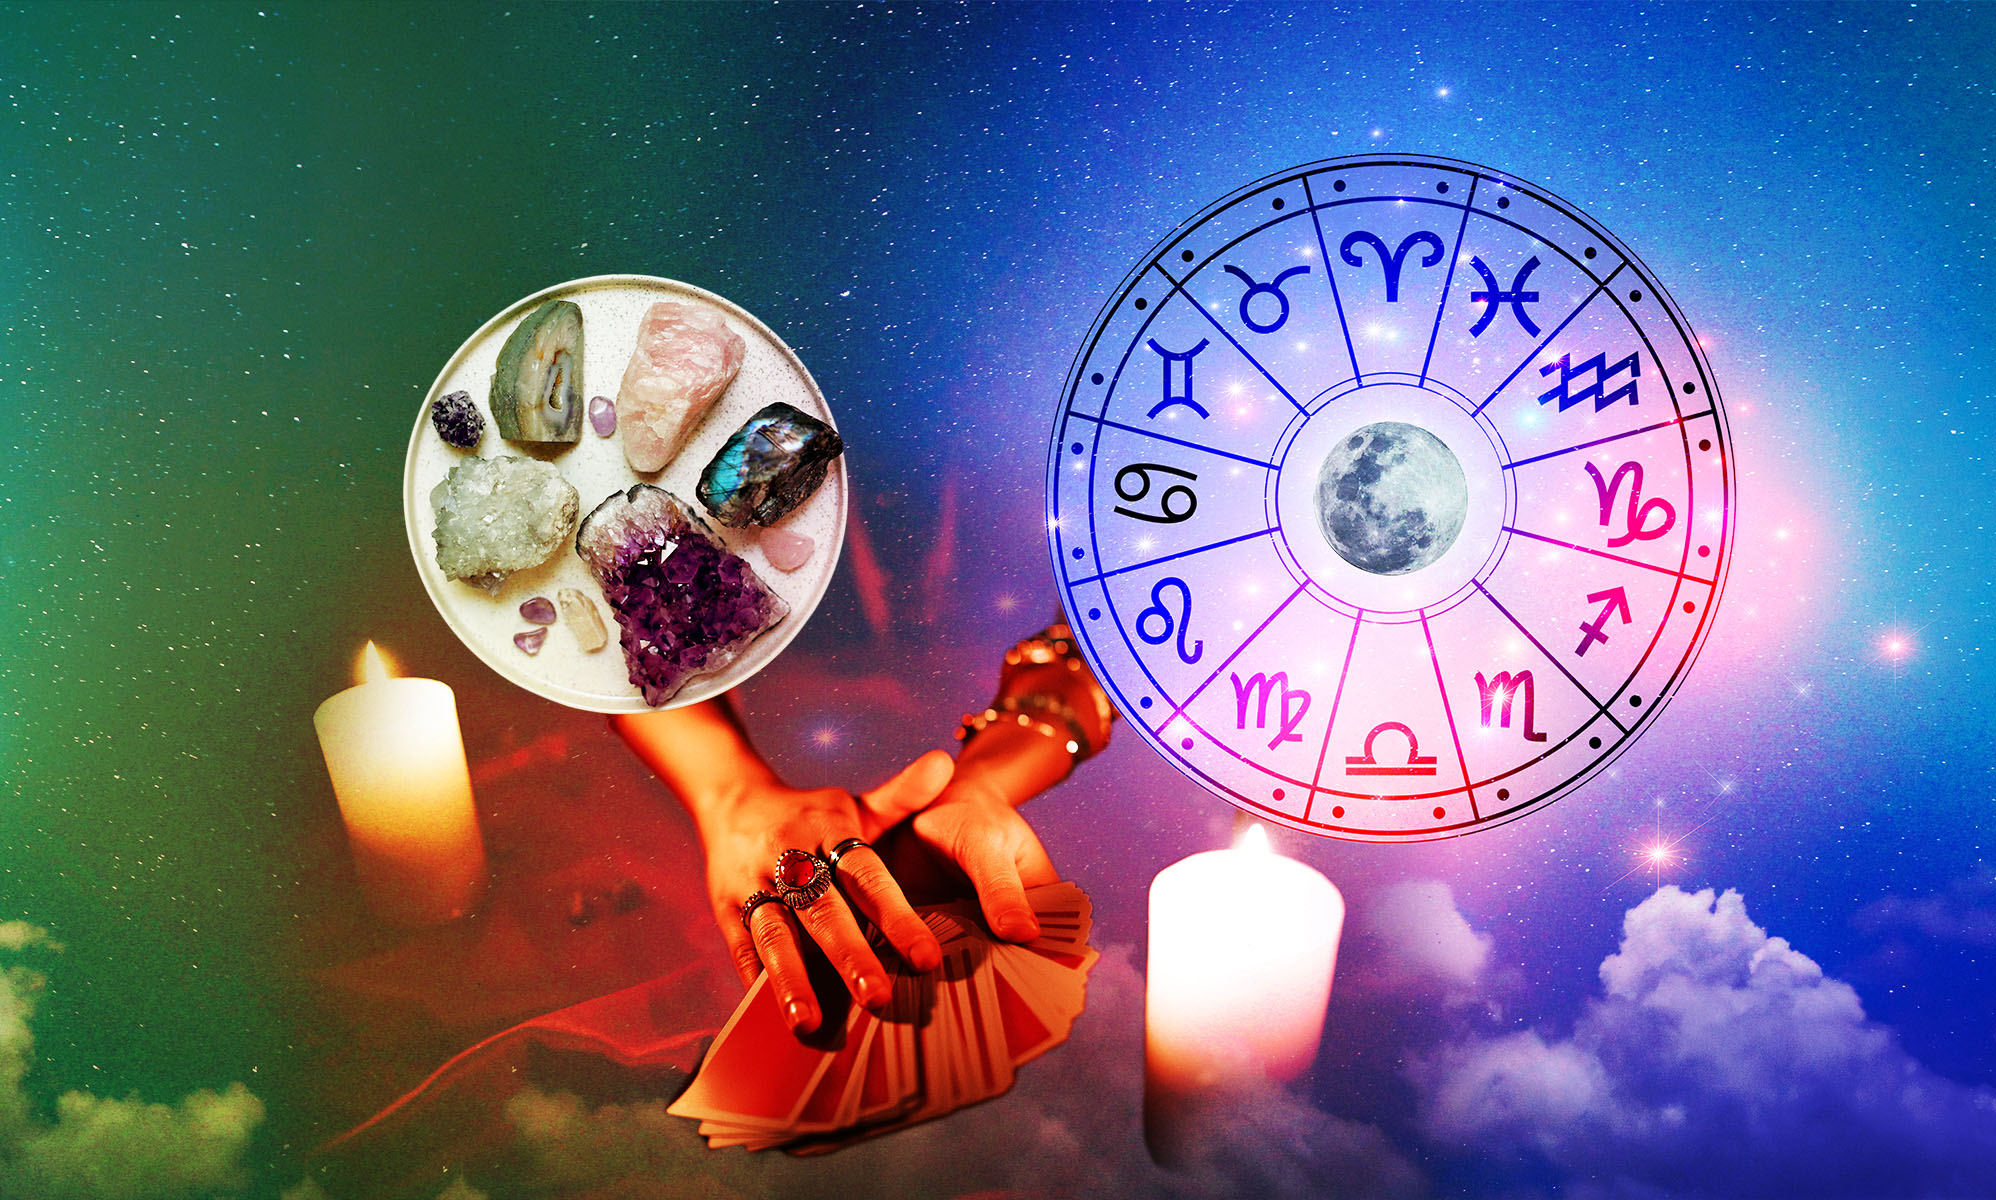 Astrology, tarot and queer spiritualities can be tools of power